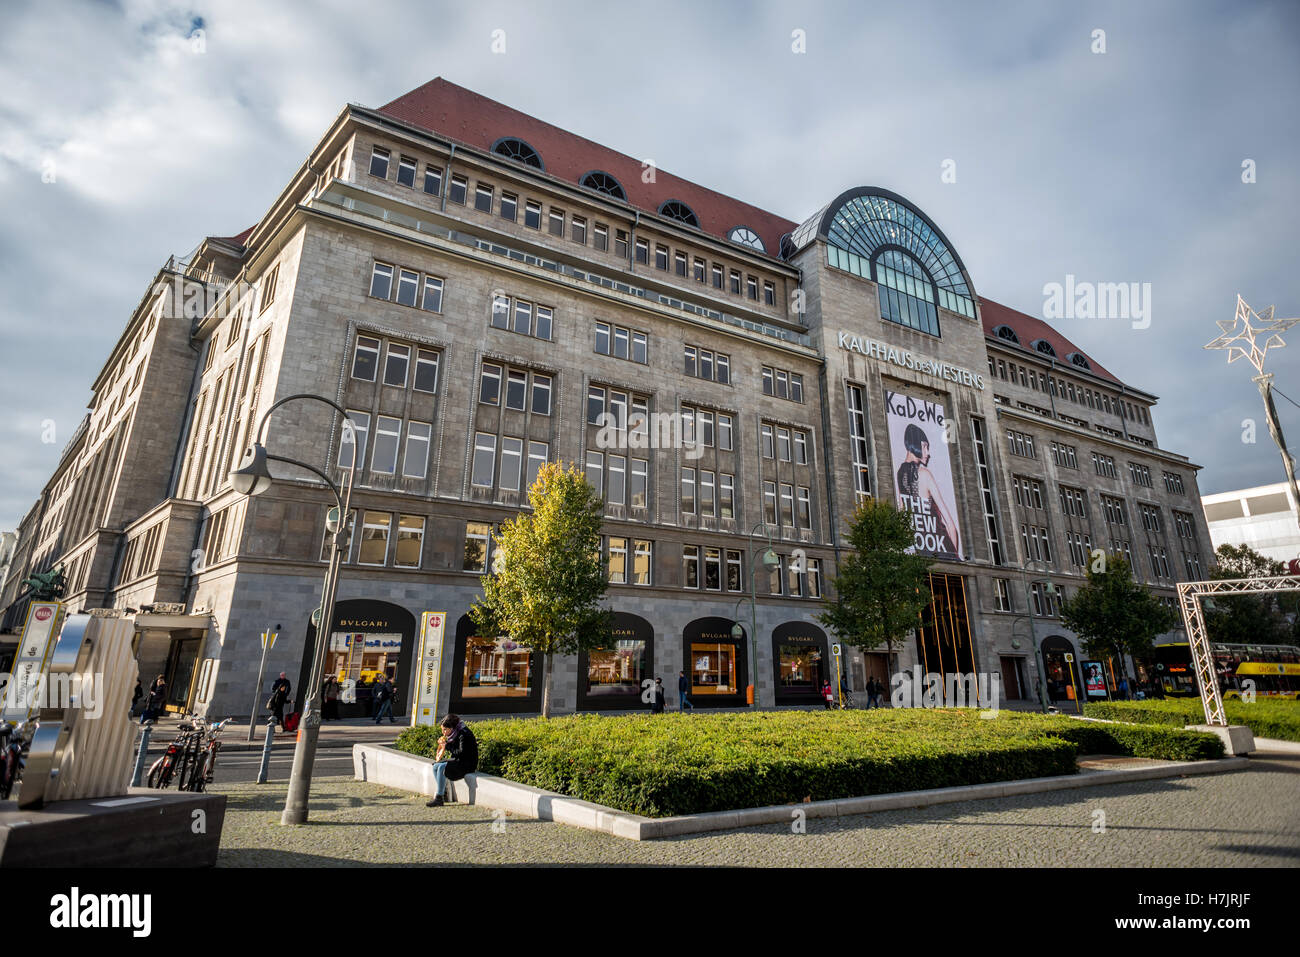 Kaufhaus Des Westens, or KaDeWe, the largest department store in Germany, on Tauntzienstrasse in Berlin Stock Photo